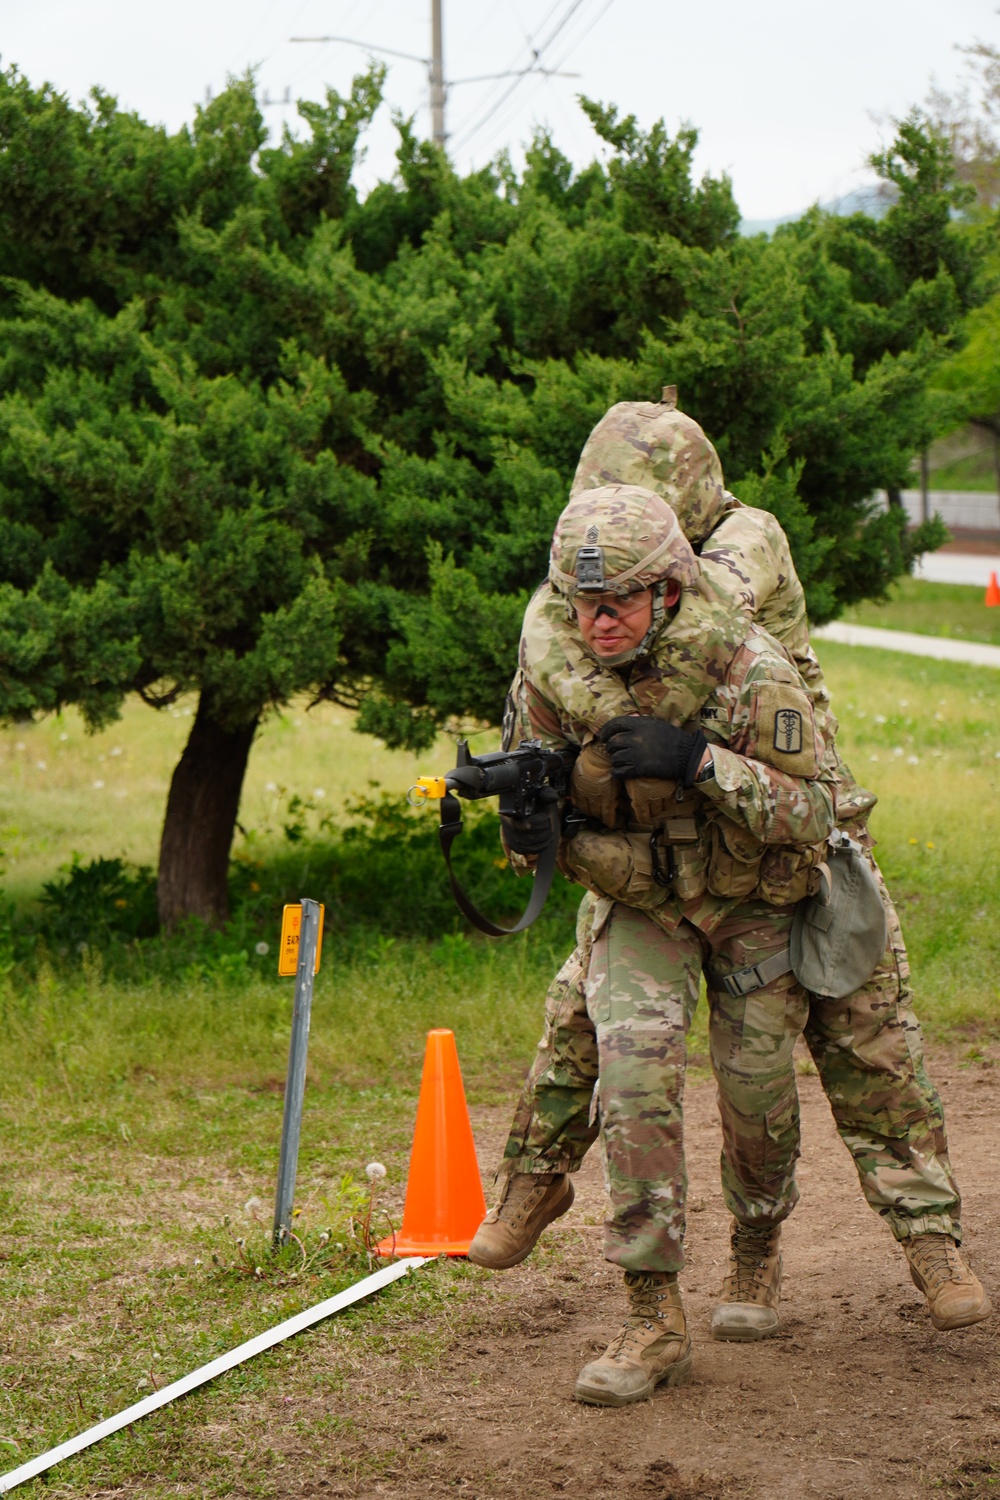 Command Sgt. Maj. Ryan moves a simulated casualty using the one-person carry method